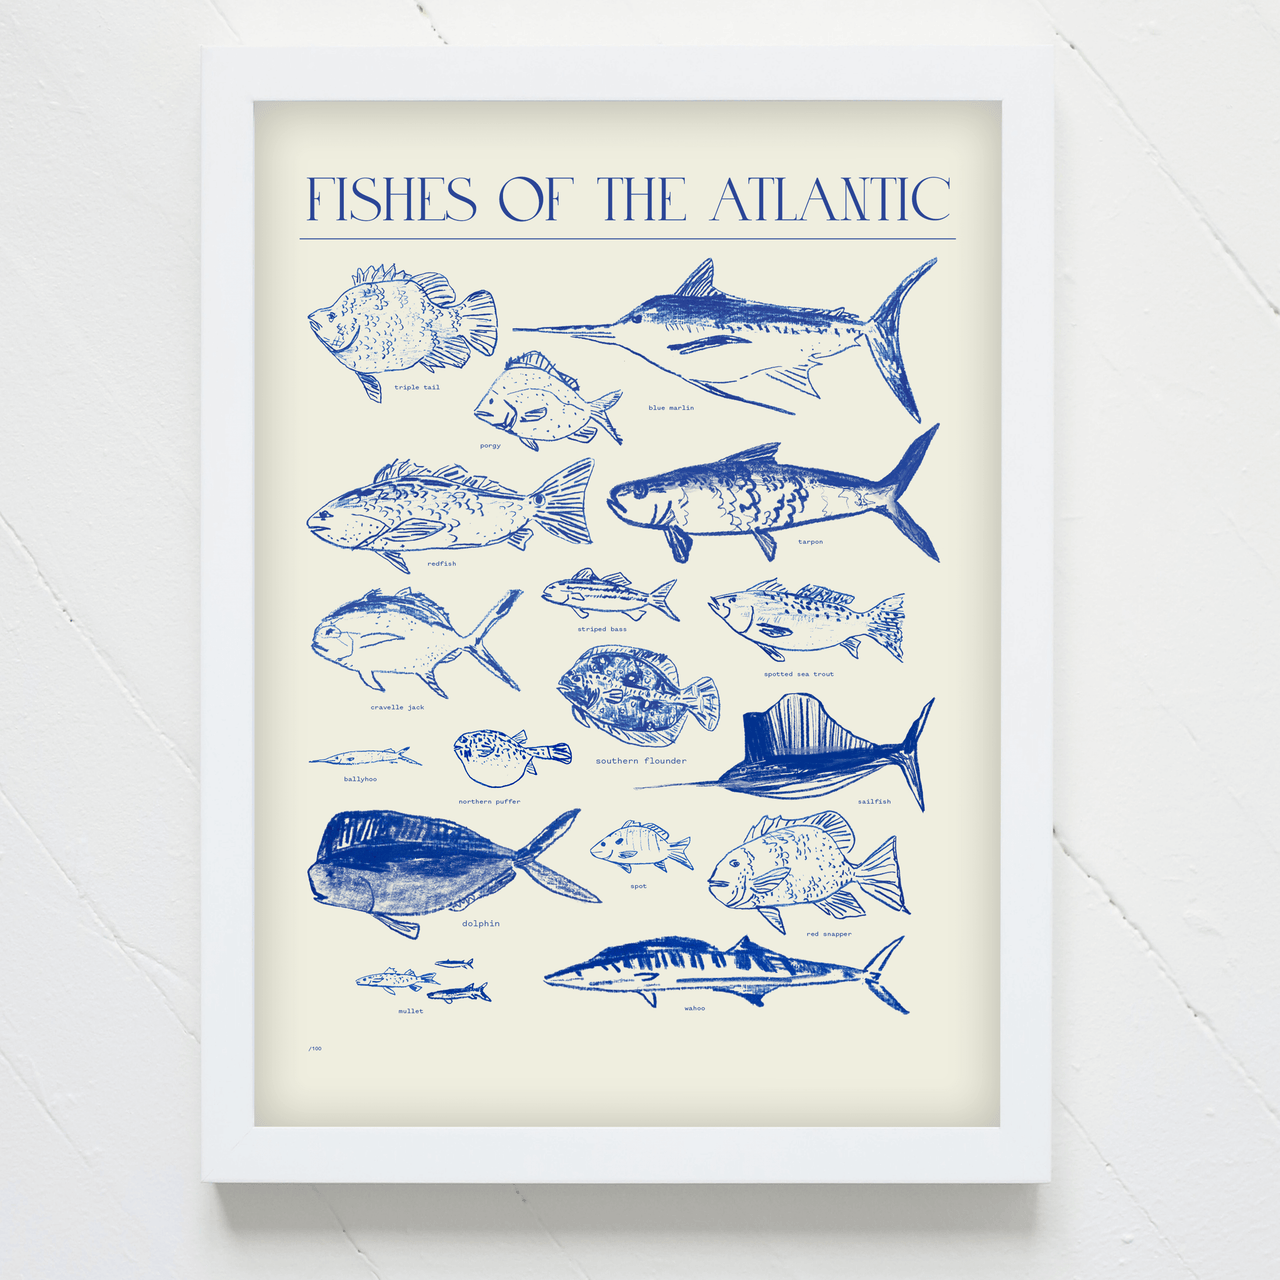 "Fishes of the Atlantic" Print